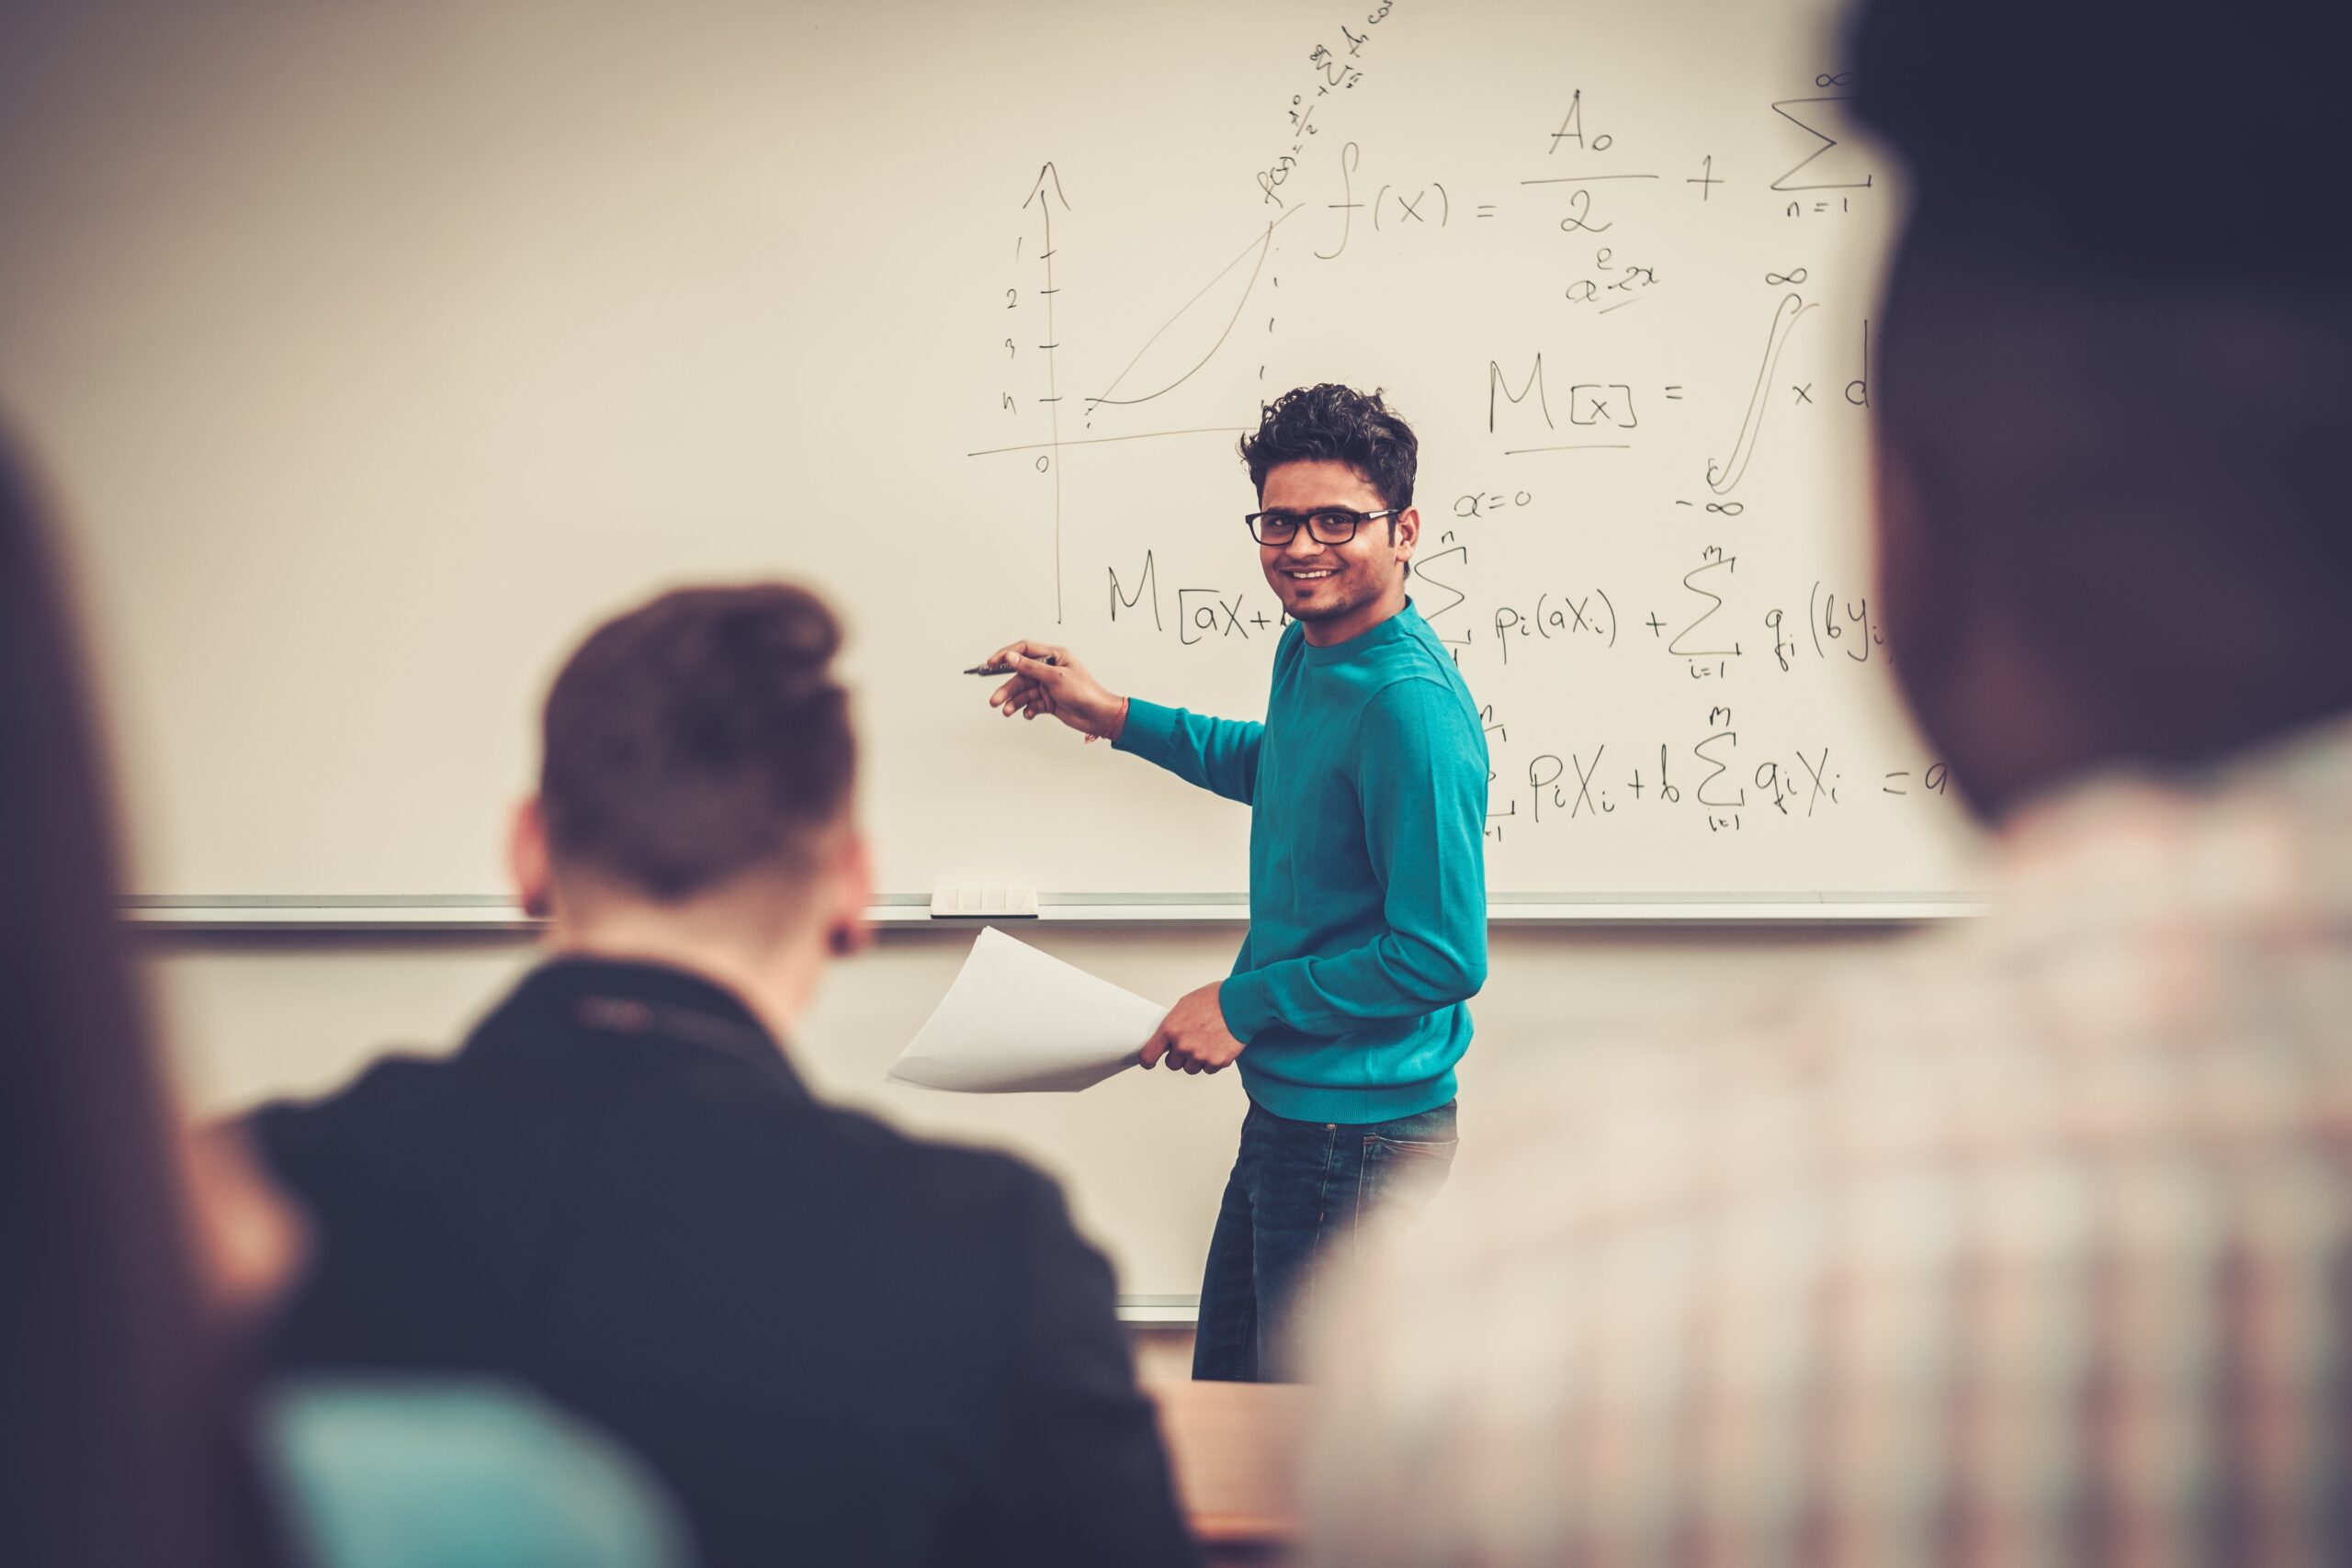 <p><span>Physics majors discover universal principles that govern our world. They have a strong foundation in research and analytical skills. The major can be applied to various industries, such as research and development for new technologies. Physicists are always on the cutting edge of technology, leading to good income jobs in academia, etc.</span></p>